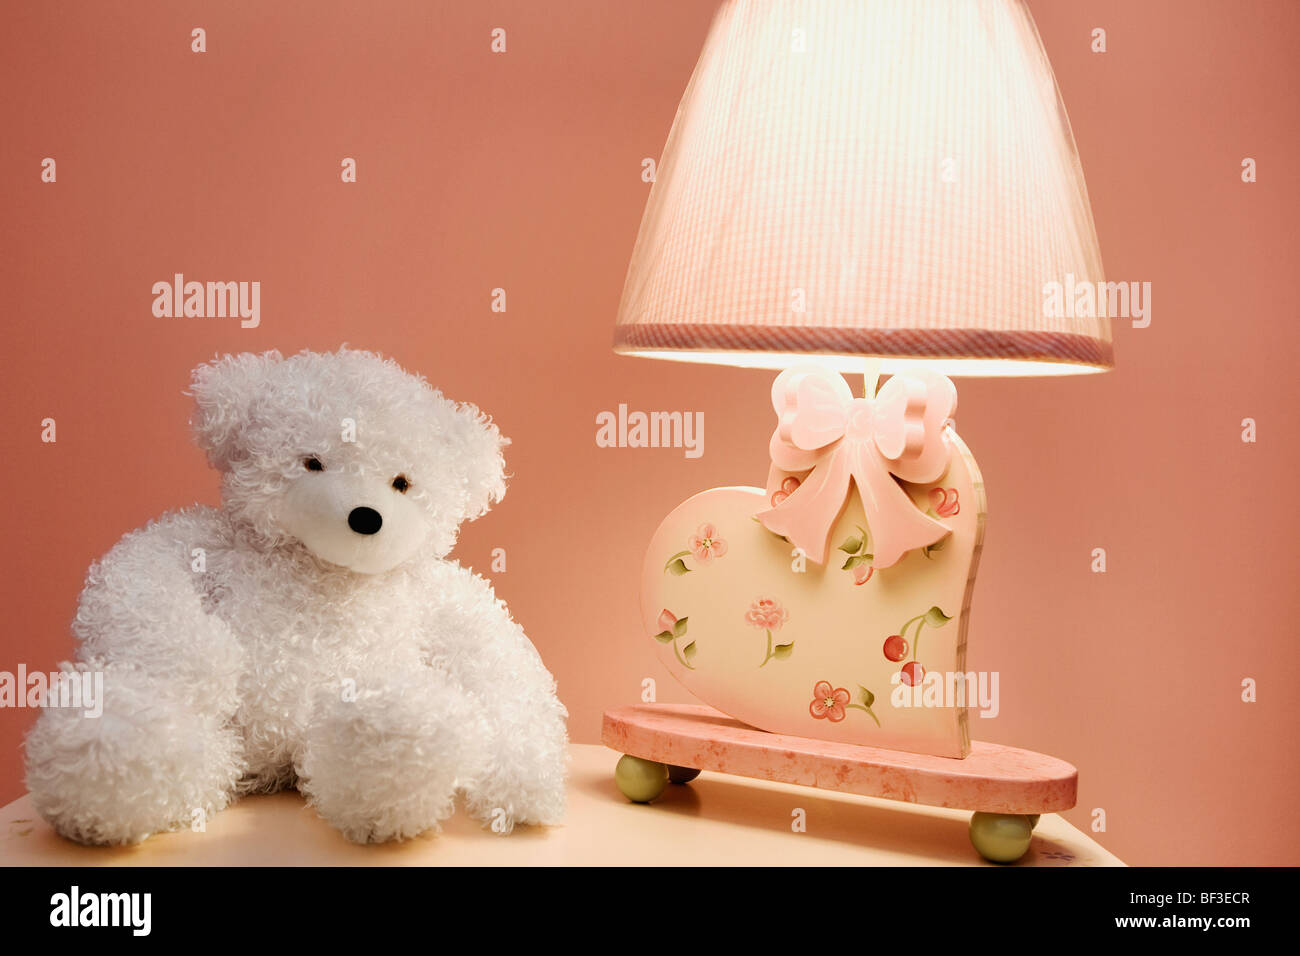 Stuffed toy and a lamp on a night table Stock Photo